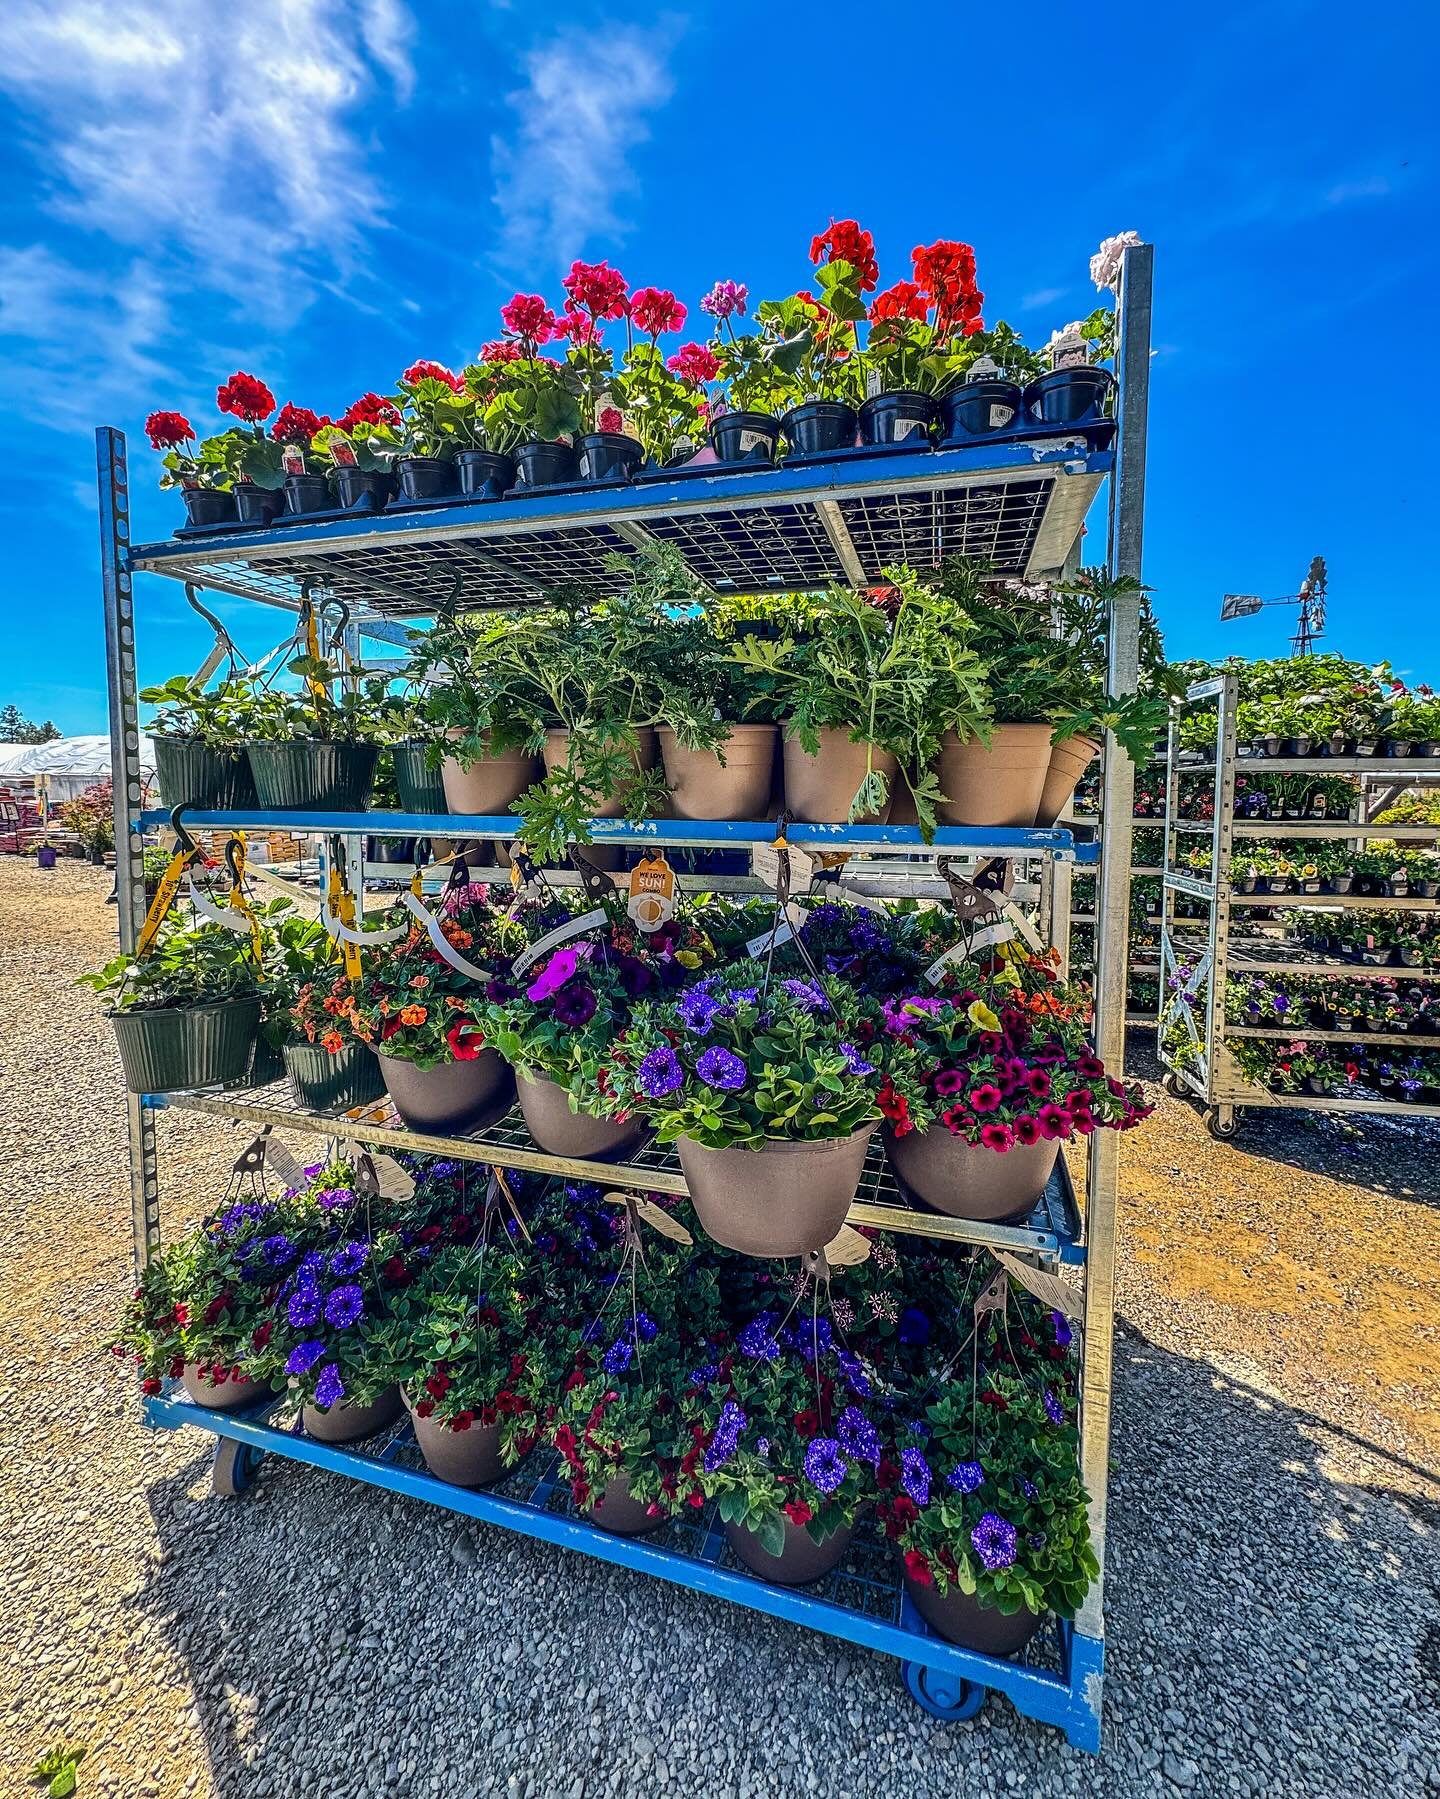 💐 Fresh flowers are arriving every day now at the Nursery. And just in time for Mother&rsquo;s Day!

Look how beautiful those flower baskets are! If you think we&rsquo;ve got a great selection now, just wait until you see what&rsquo;s coming in toda